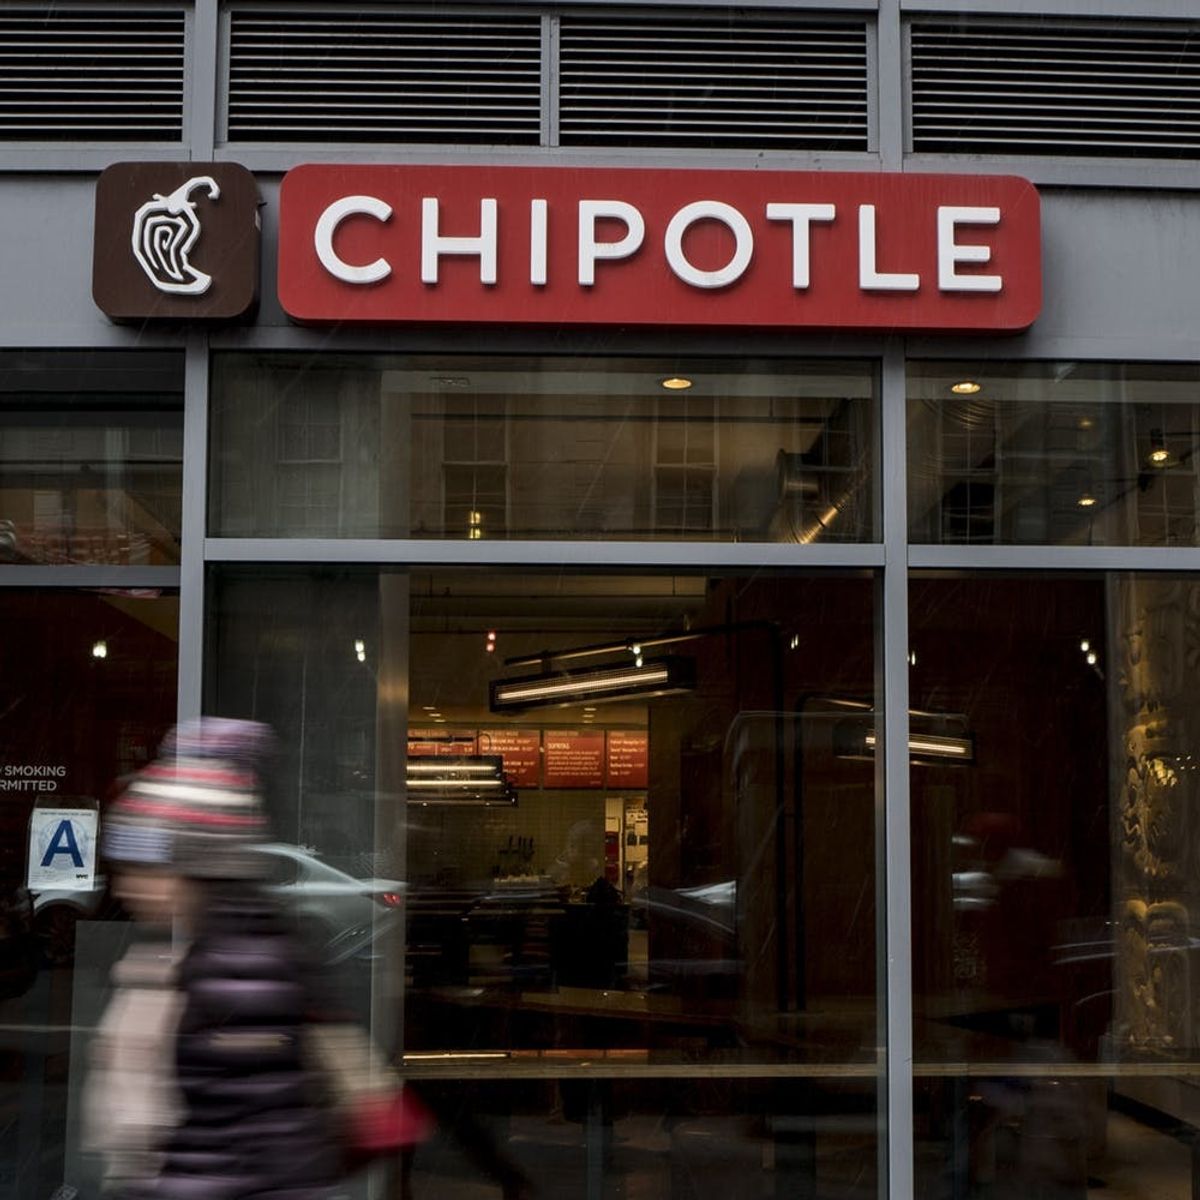 You May Soon Be Able to Get Your Chipotle or Shake Shack Fix Via Amazon